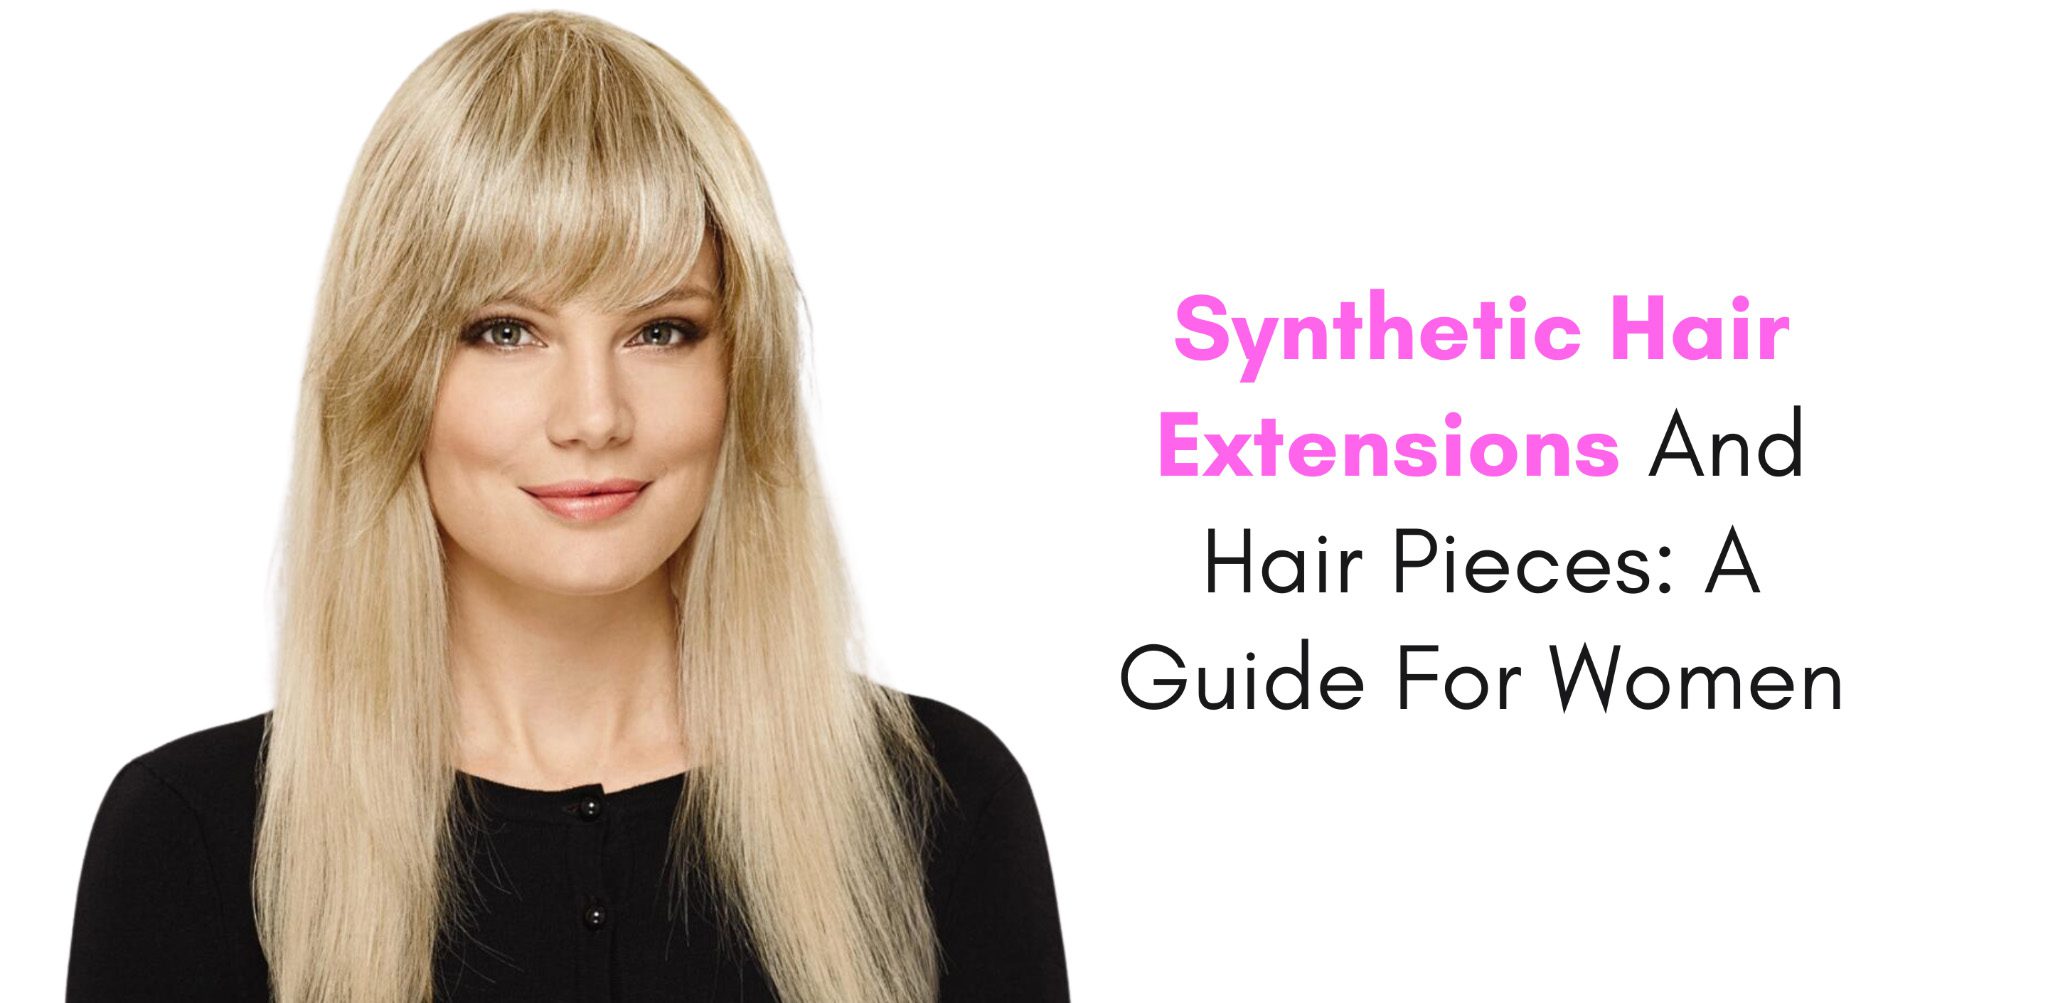 Synthetic Hair Extensions And Hair Pieces: A Guide For Women